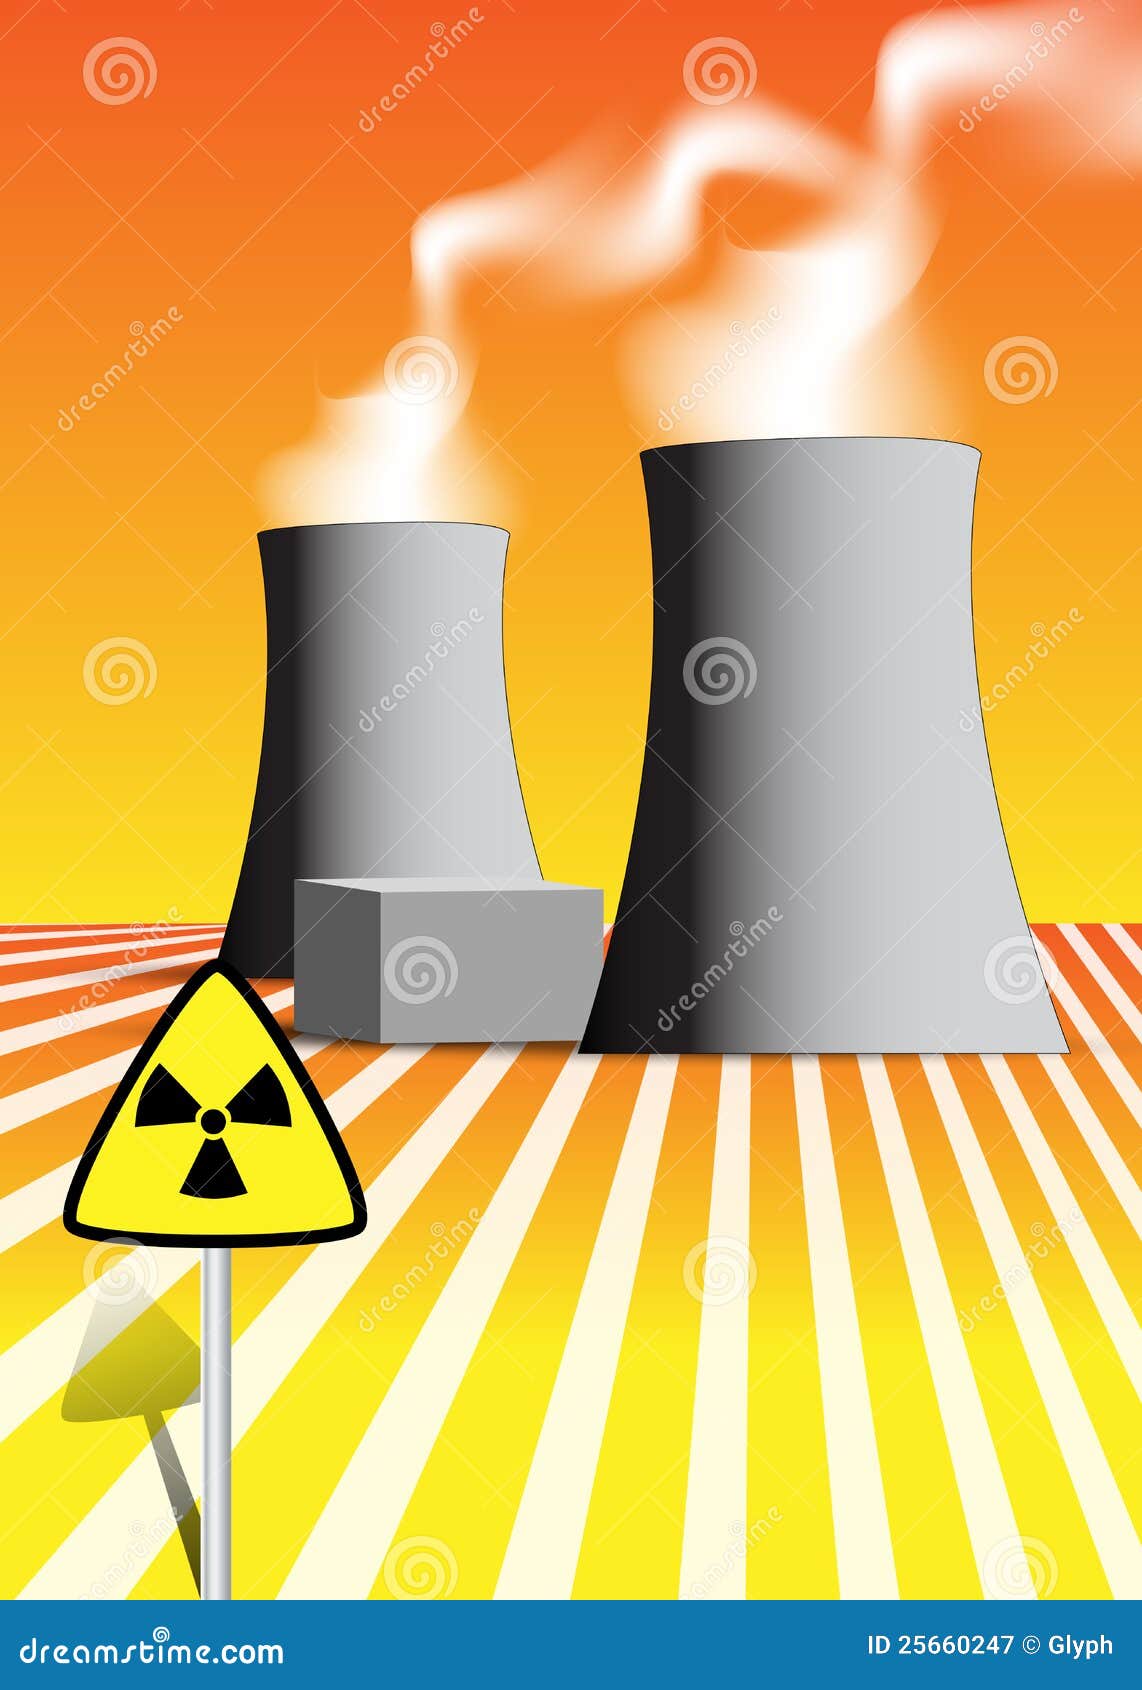 clipart of nuclear power plant - photo #22